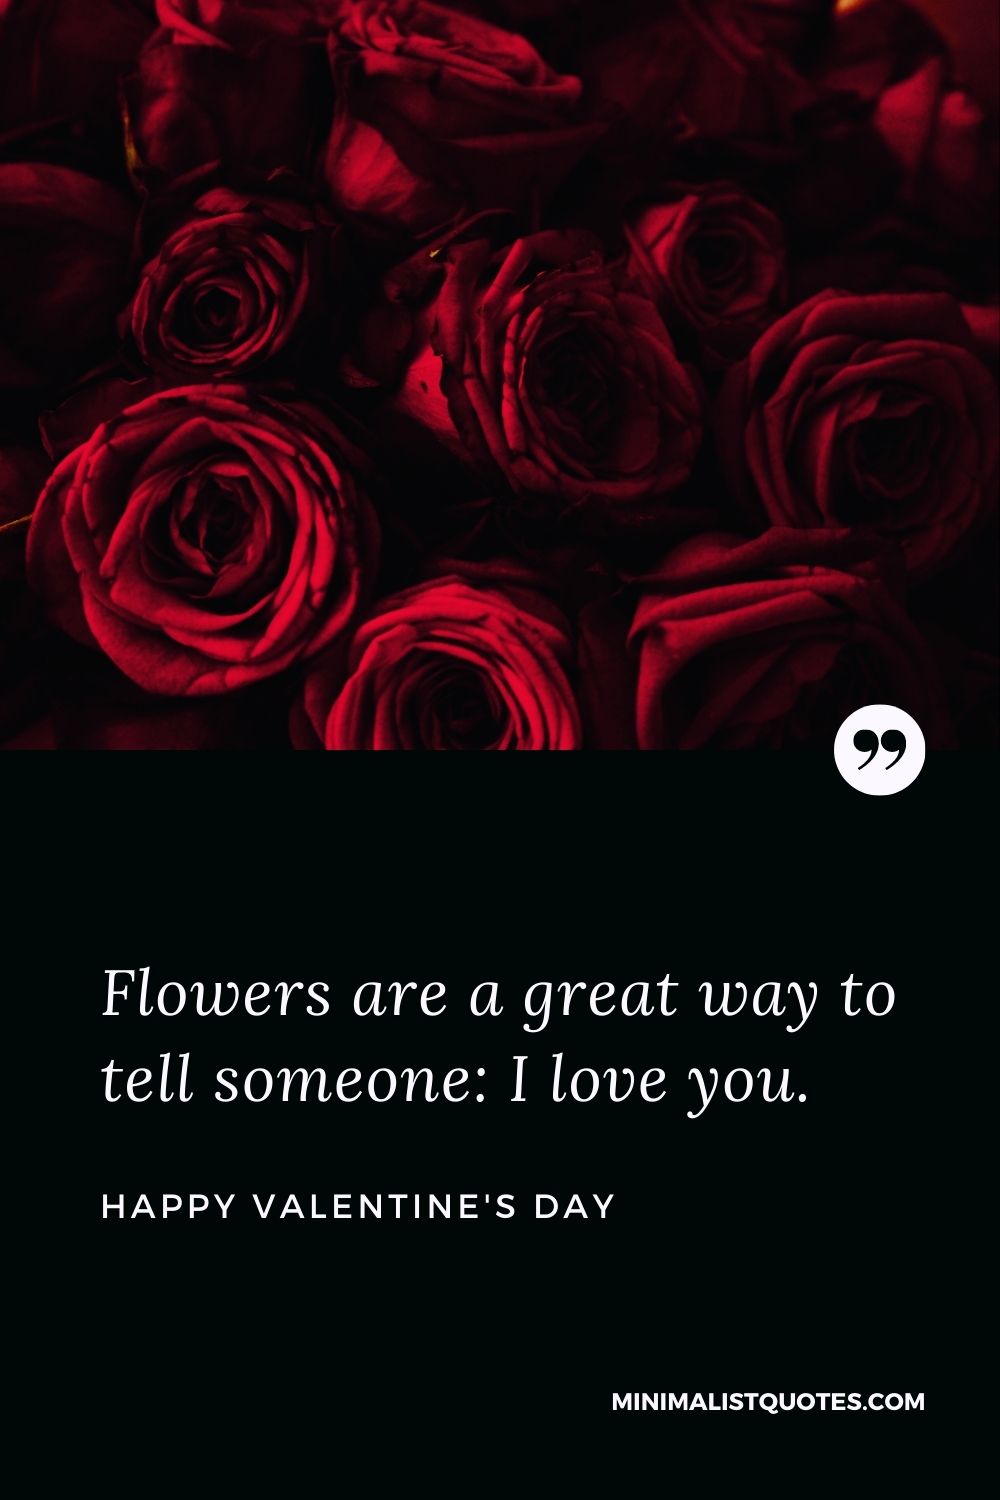 Valentine's Day Wish & Message With Image: Flowers are a great way to tell someone: I love you. Happy Valentine's Day!